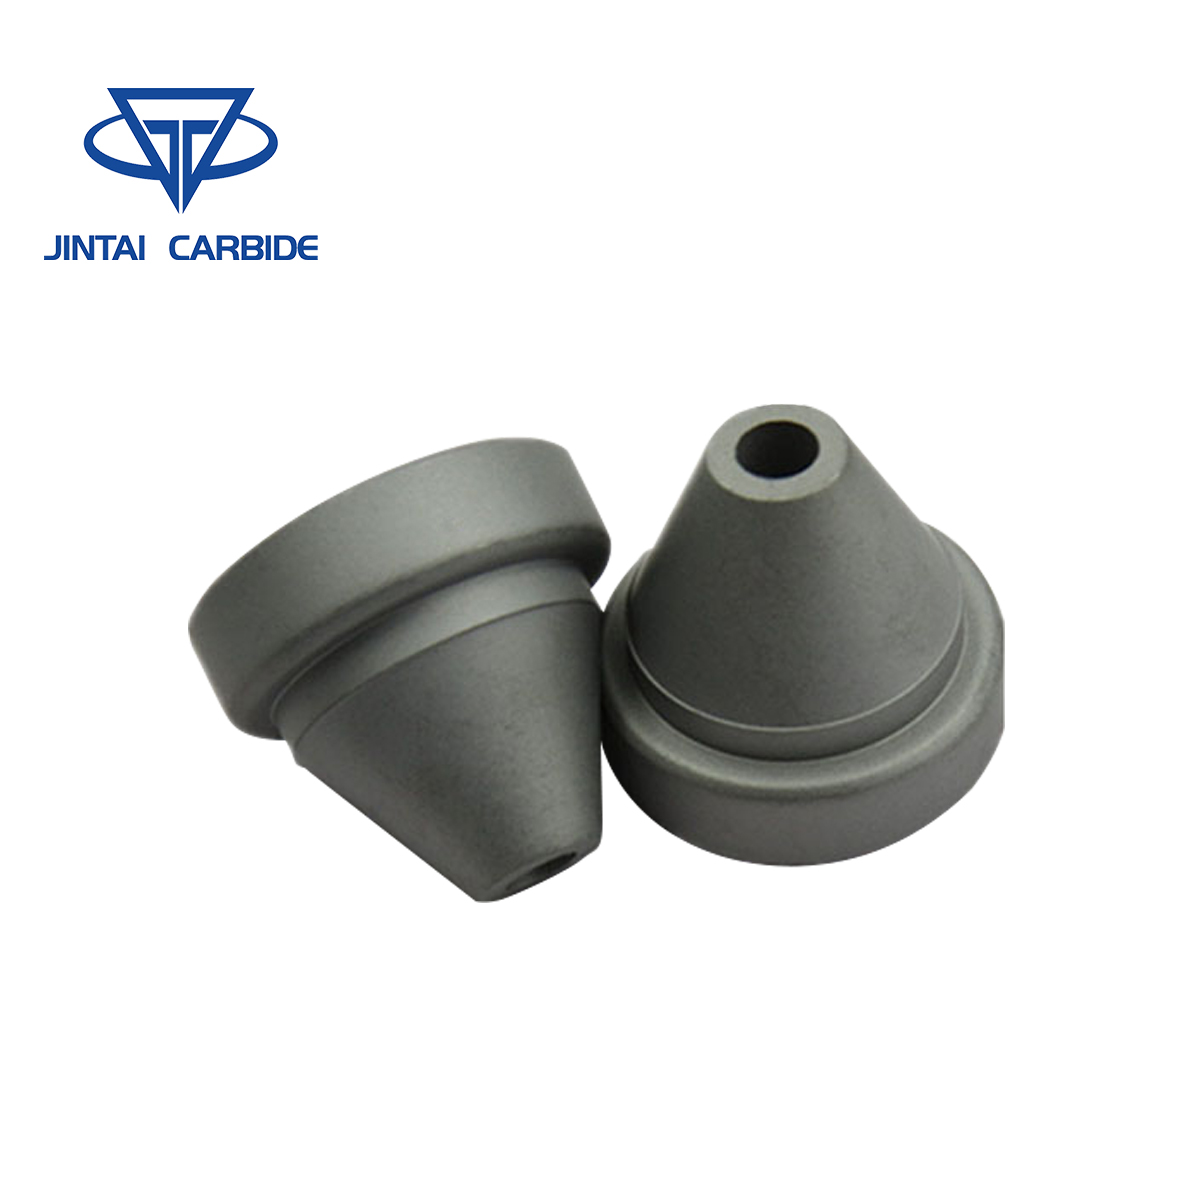 Tungsten Carbide Custom Shapes & Forms